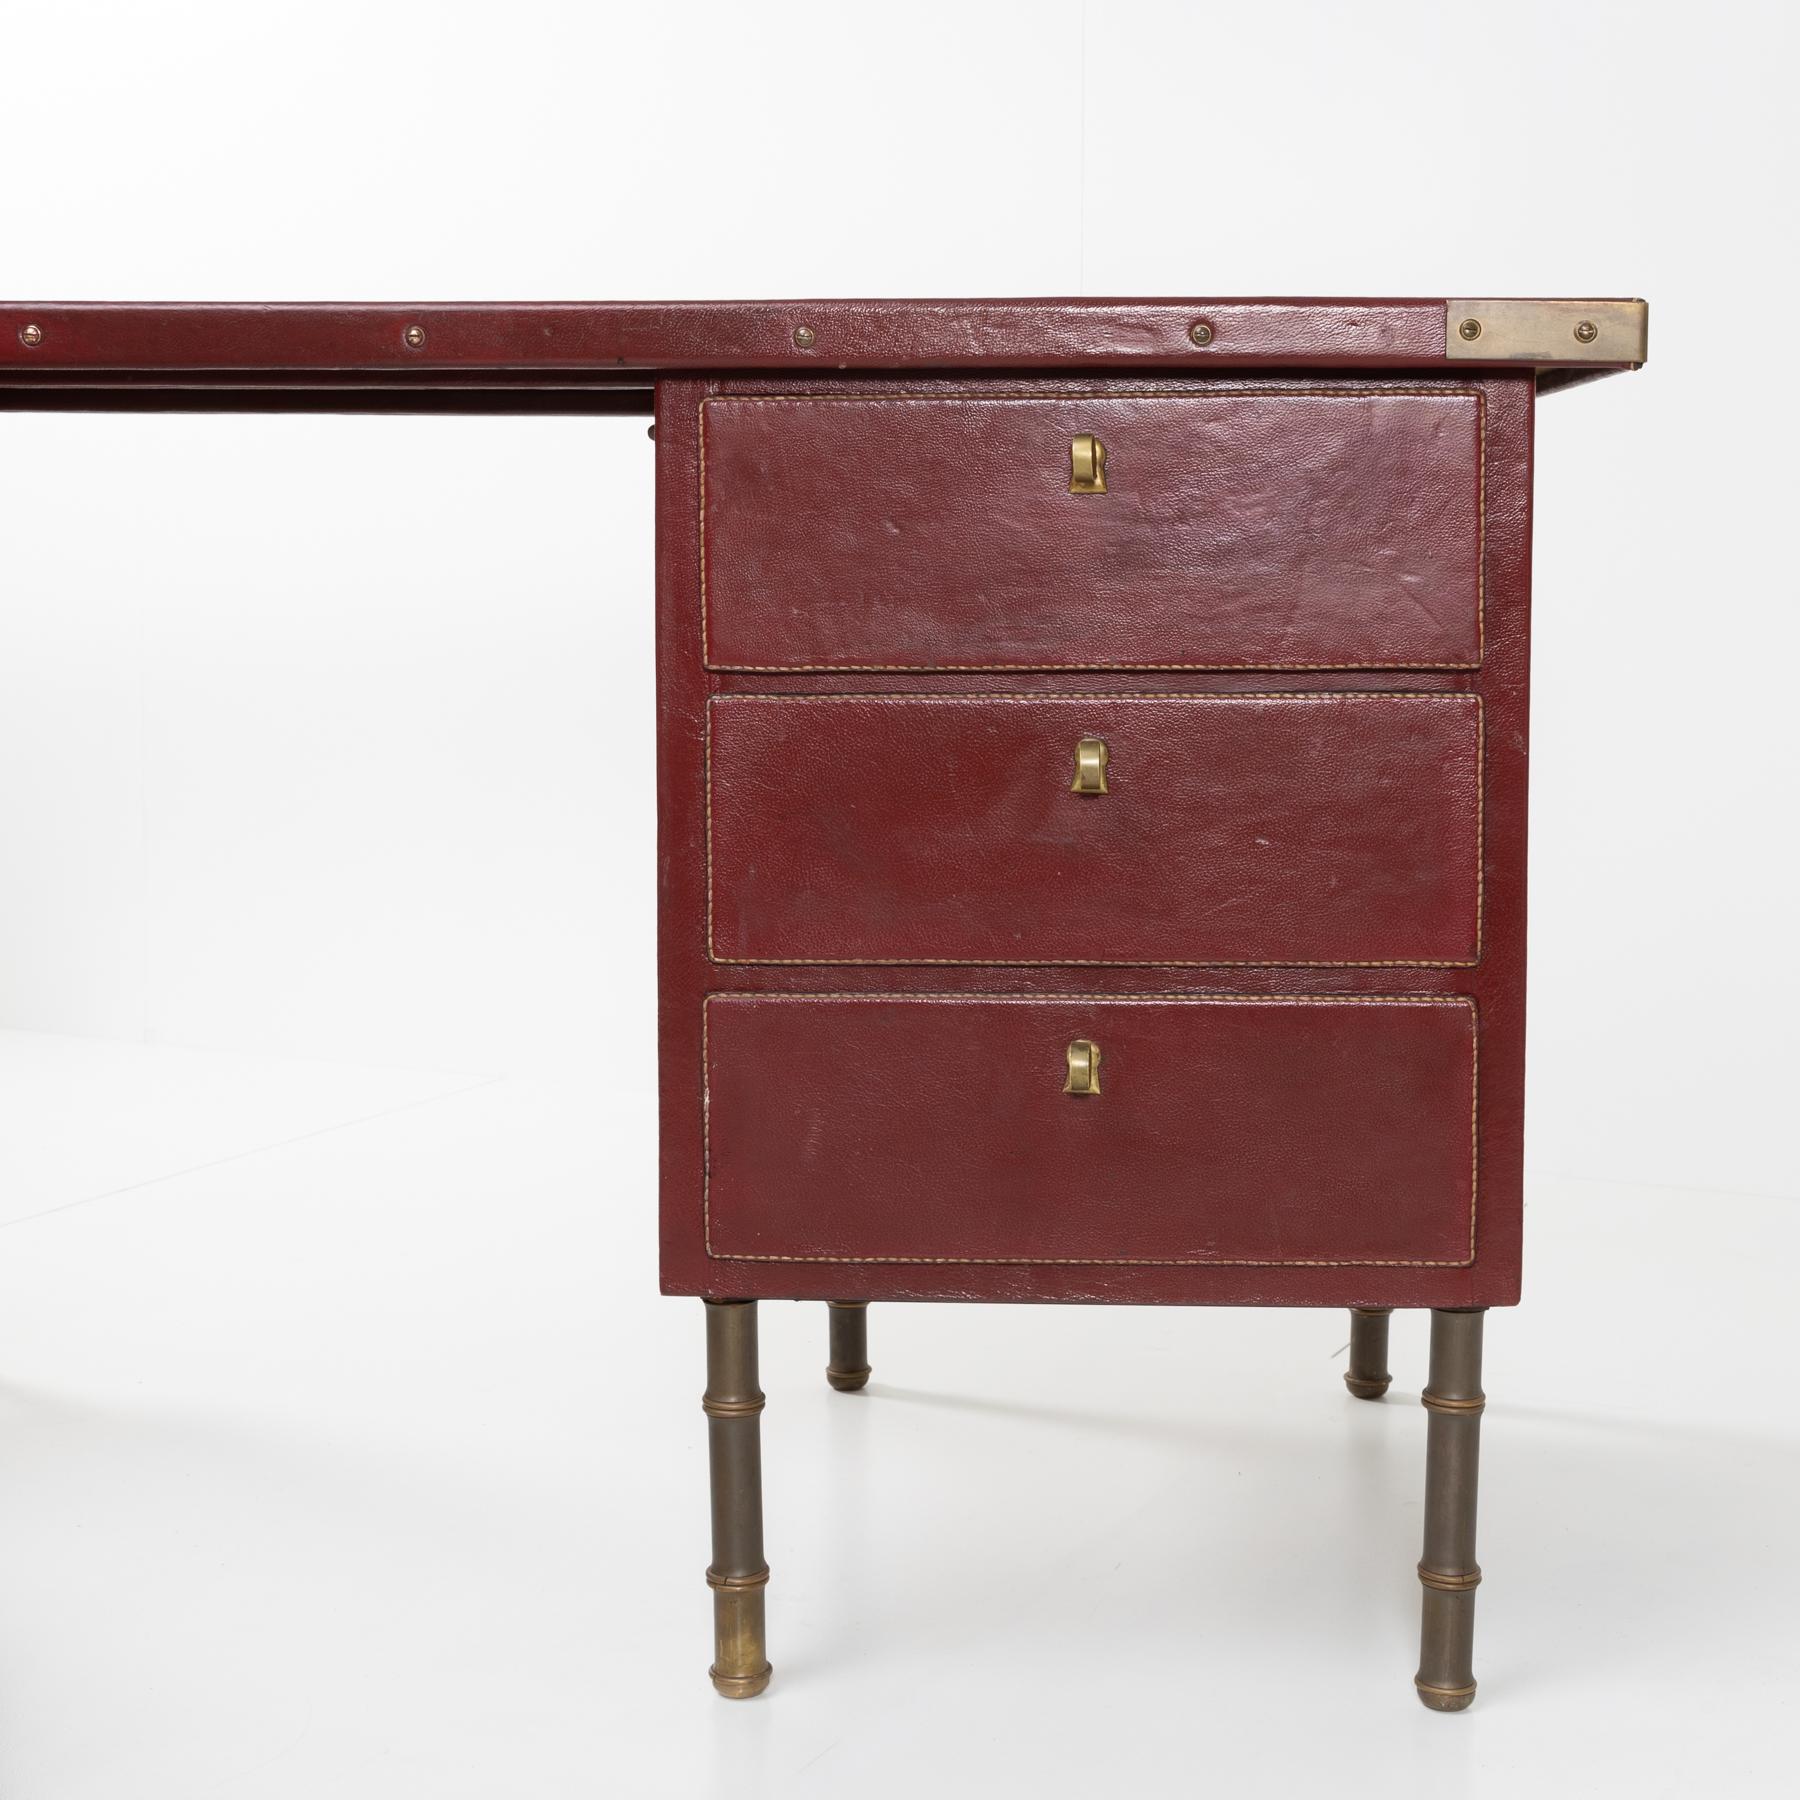 Mid-20th Century Coffered Desk with Its Matching Chair in the Shape of a Horse Saddle